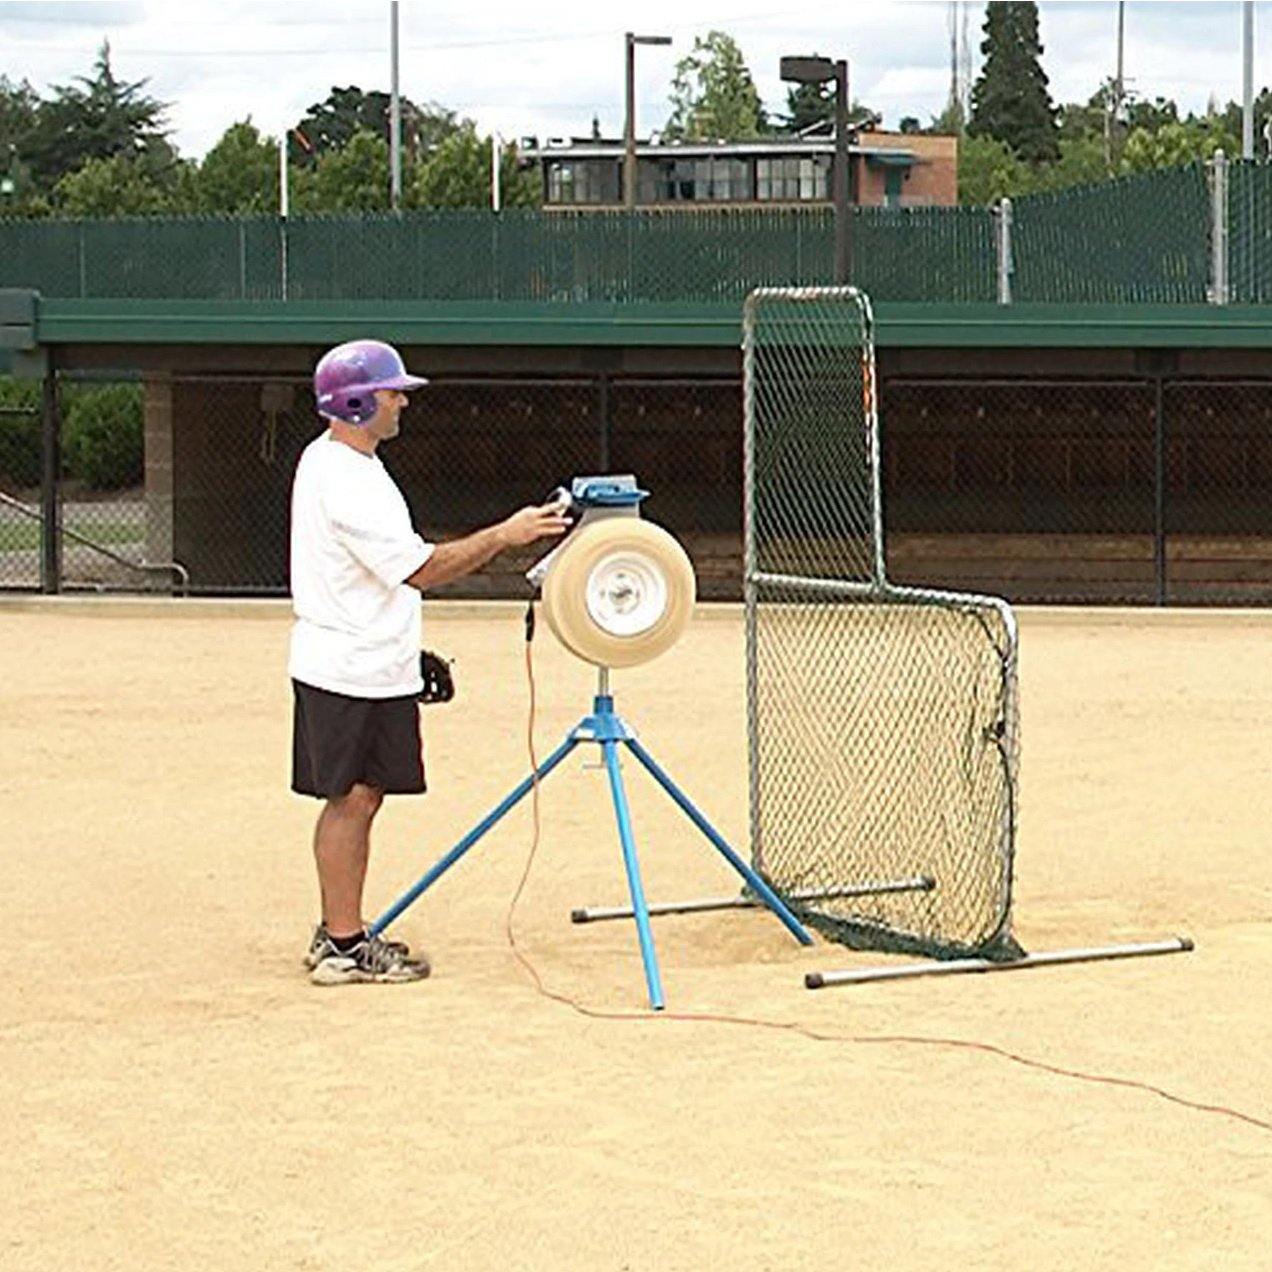 Jugs BP1 Pitching Machine for Baseball  and L Screen Set Up 